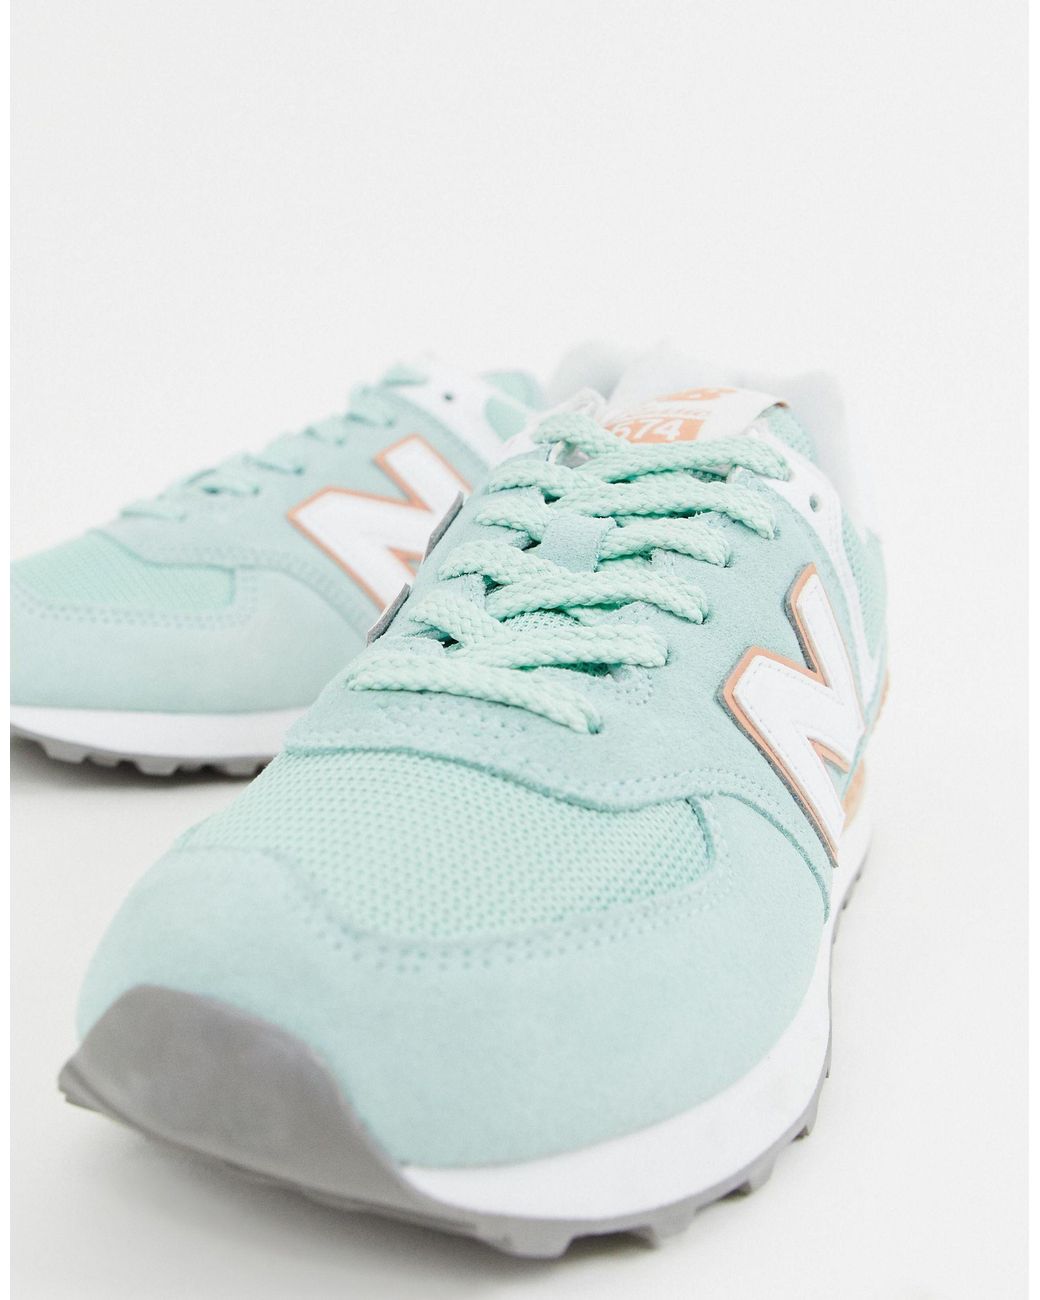 New Balance 574 V2 Pastel Mint Sneakers in Green | Lyst Canada